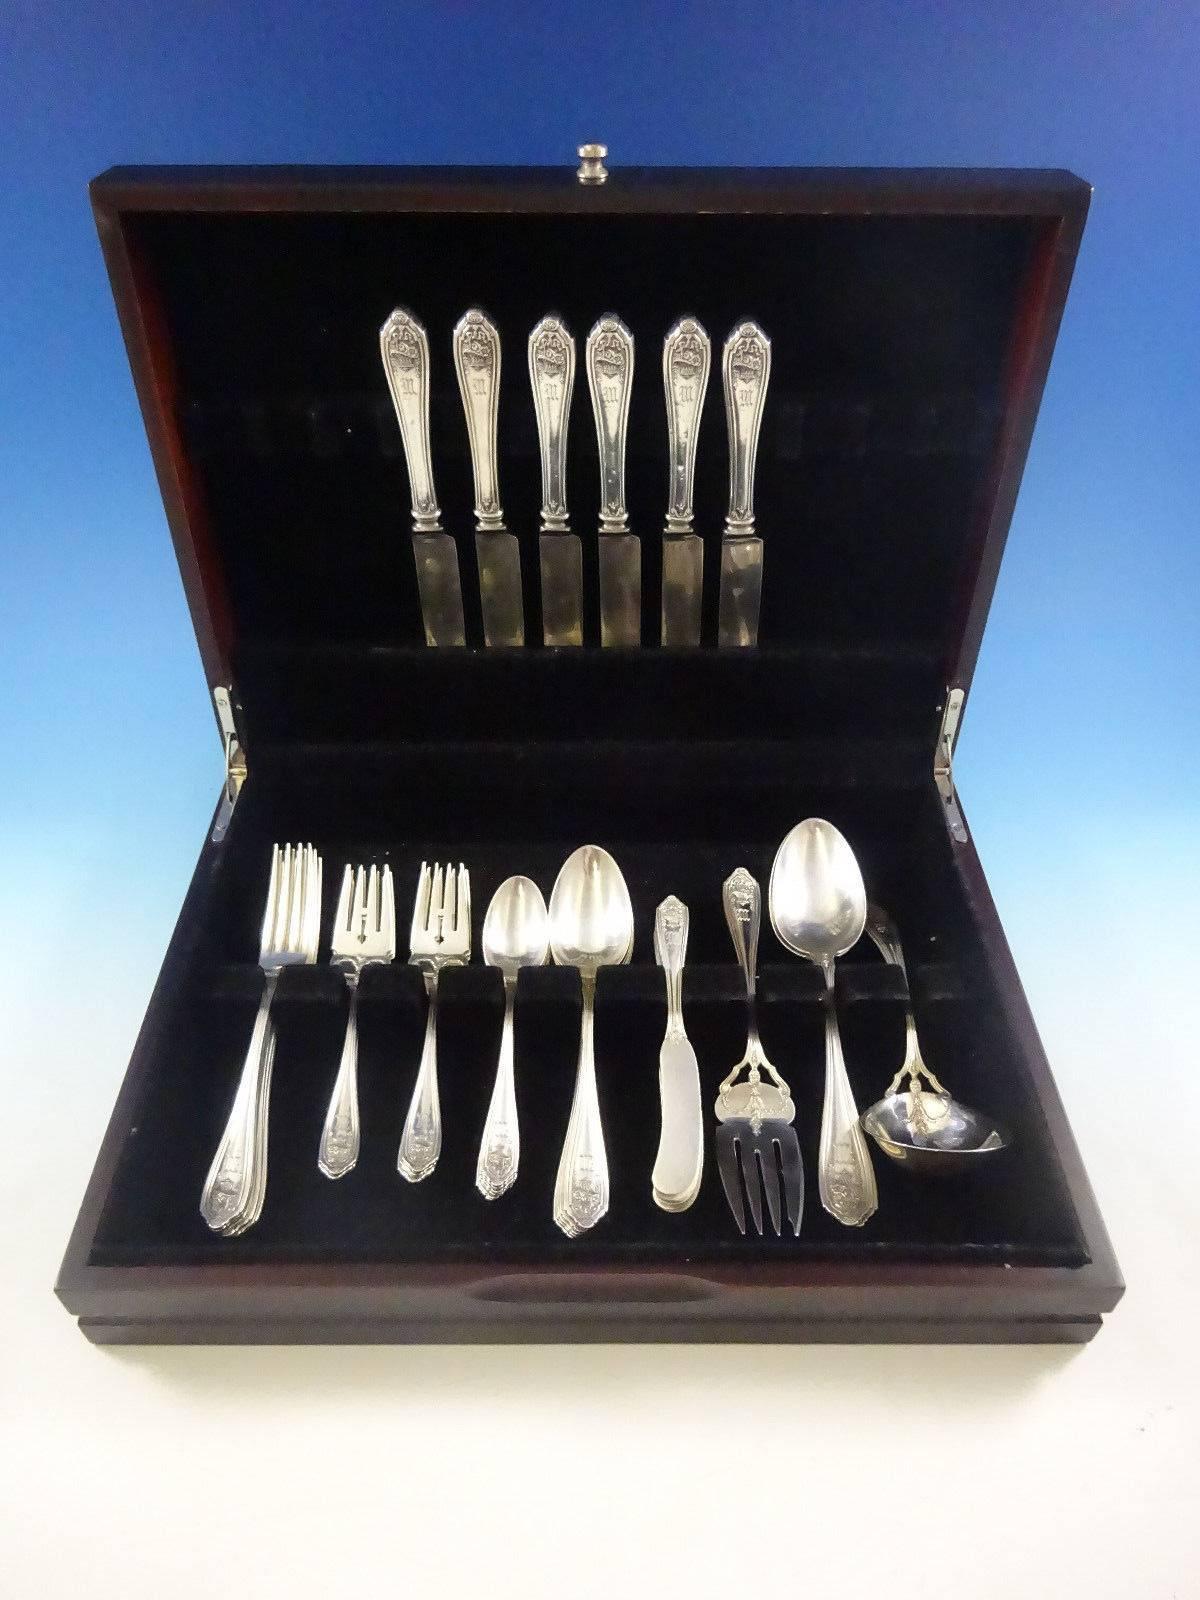 Basket of flowers by Dominick & Haff sterling silver flatware set, 40 pieces. This set includes: 

six knives, 8 1/2